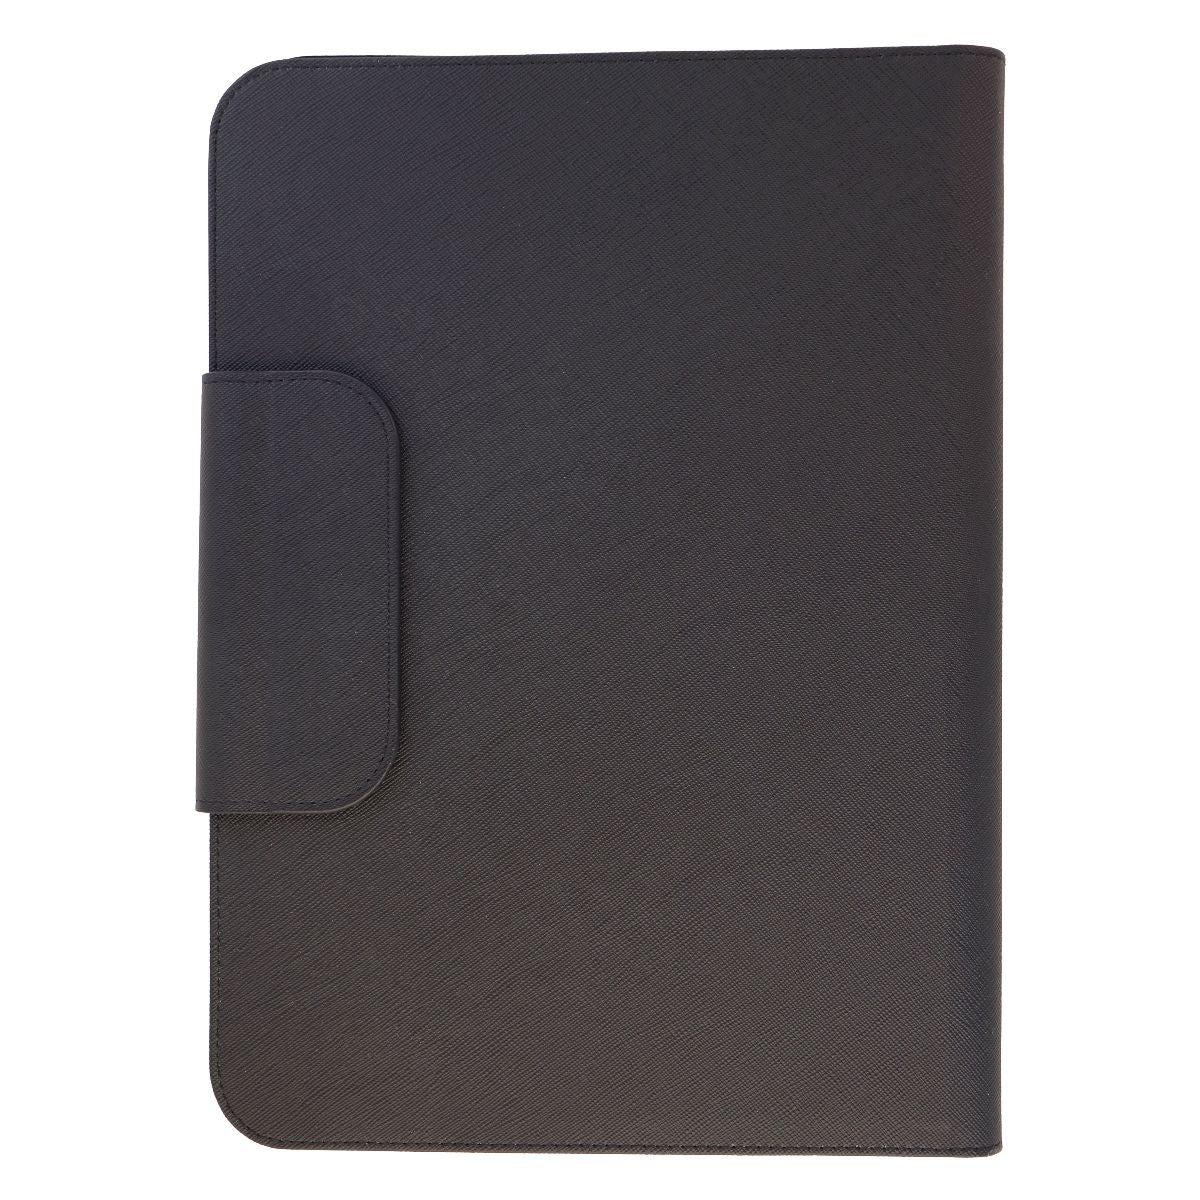 PureGear Universal Folio Elite 10 inch for Tablets - Black iPad/Tablet Accessories - Cases, Covers, Keyboard Folios PureGear    - Simple Cell Bulk Wholesale Pricing - USA Seller